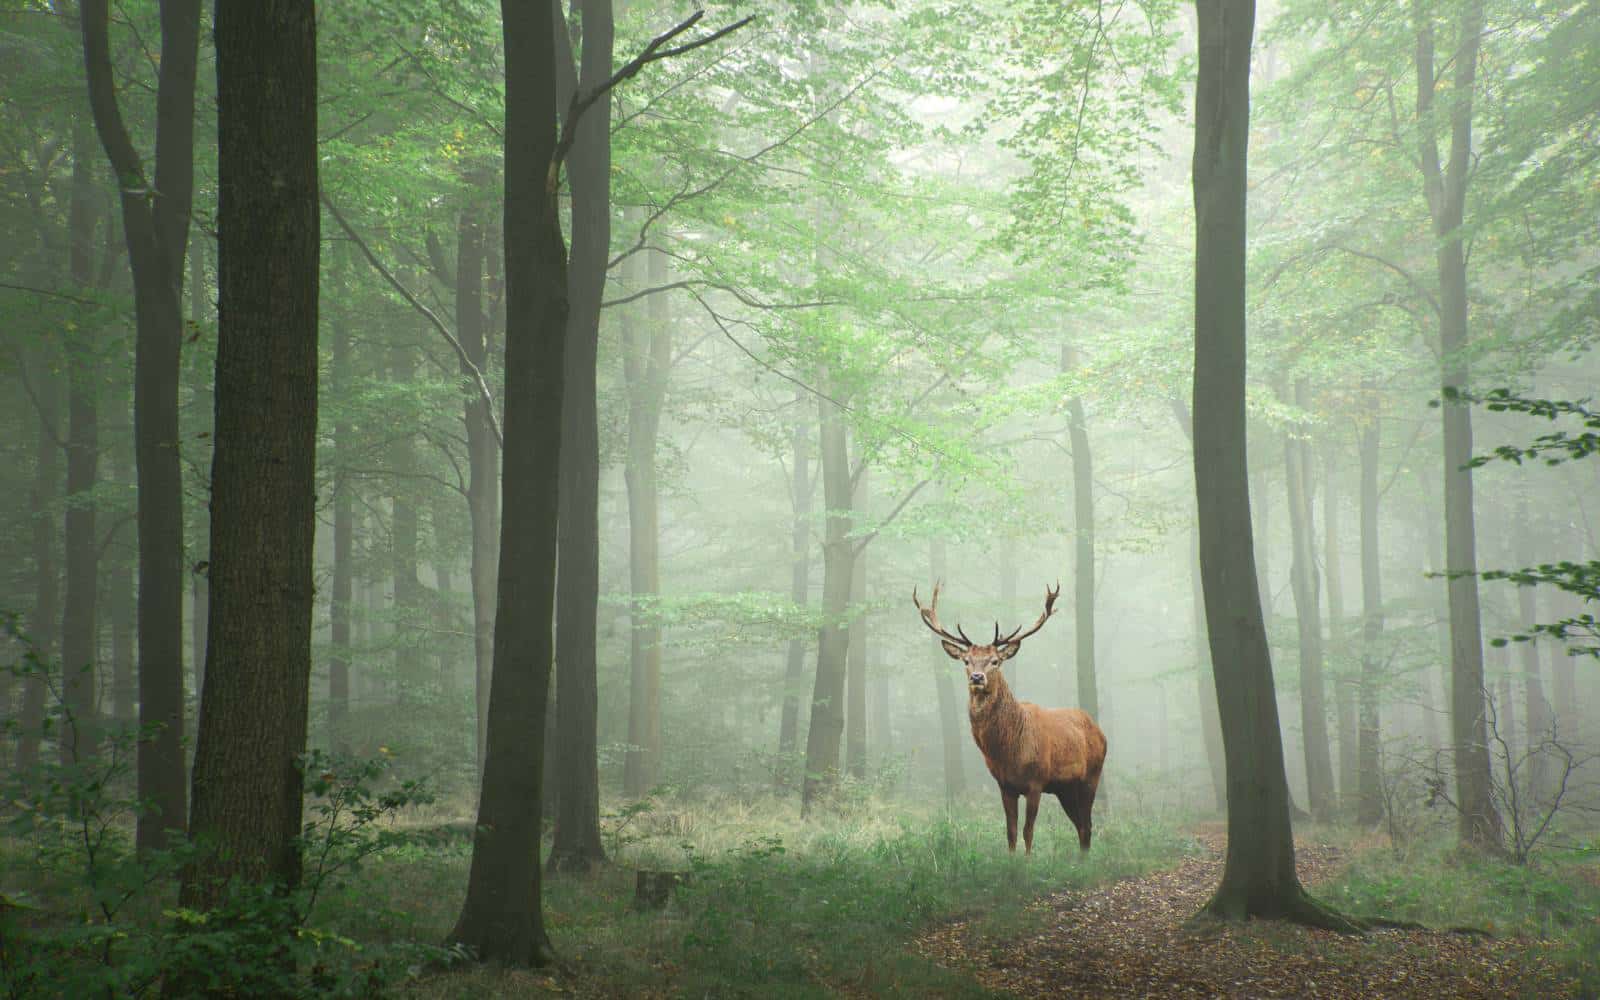 interior design ideas inspired by forests - deer